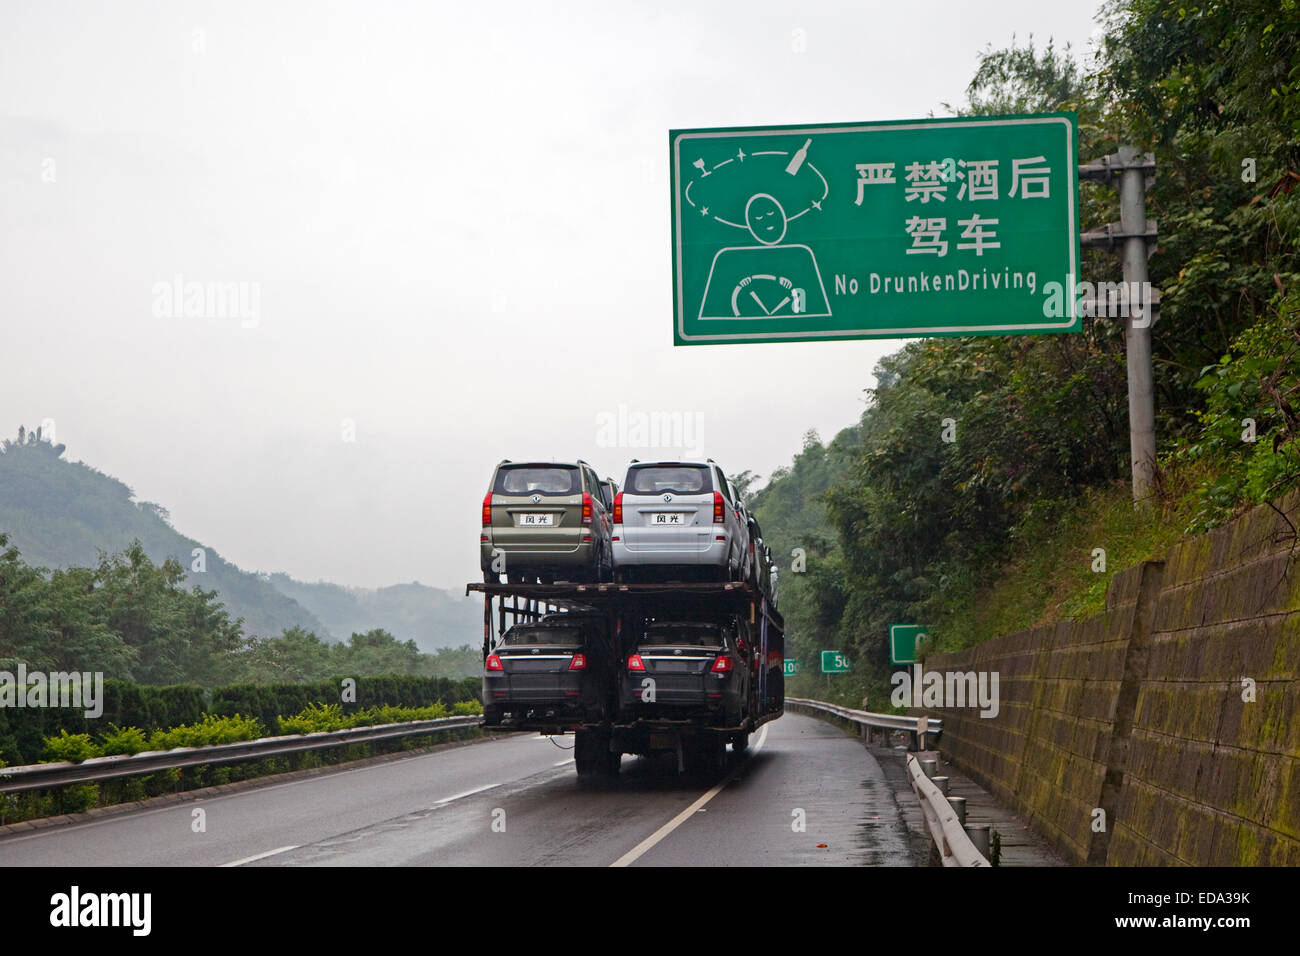 Typical Chinese side-by-side double-decker car transporter and No Drunken Driving roadsign along highway, Yunnan Province, China Stock Photo